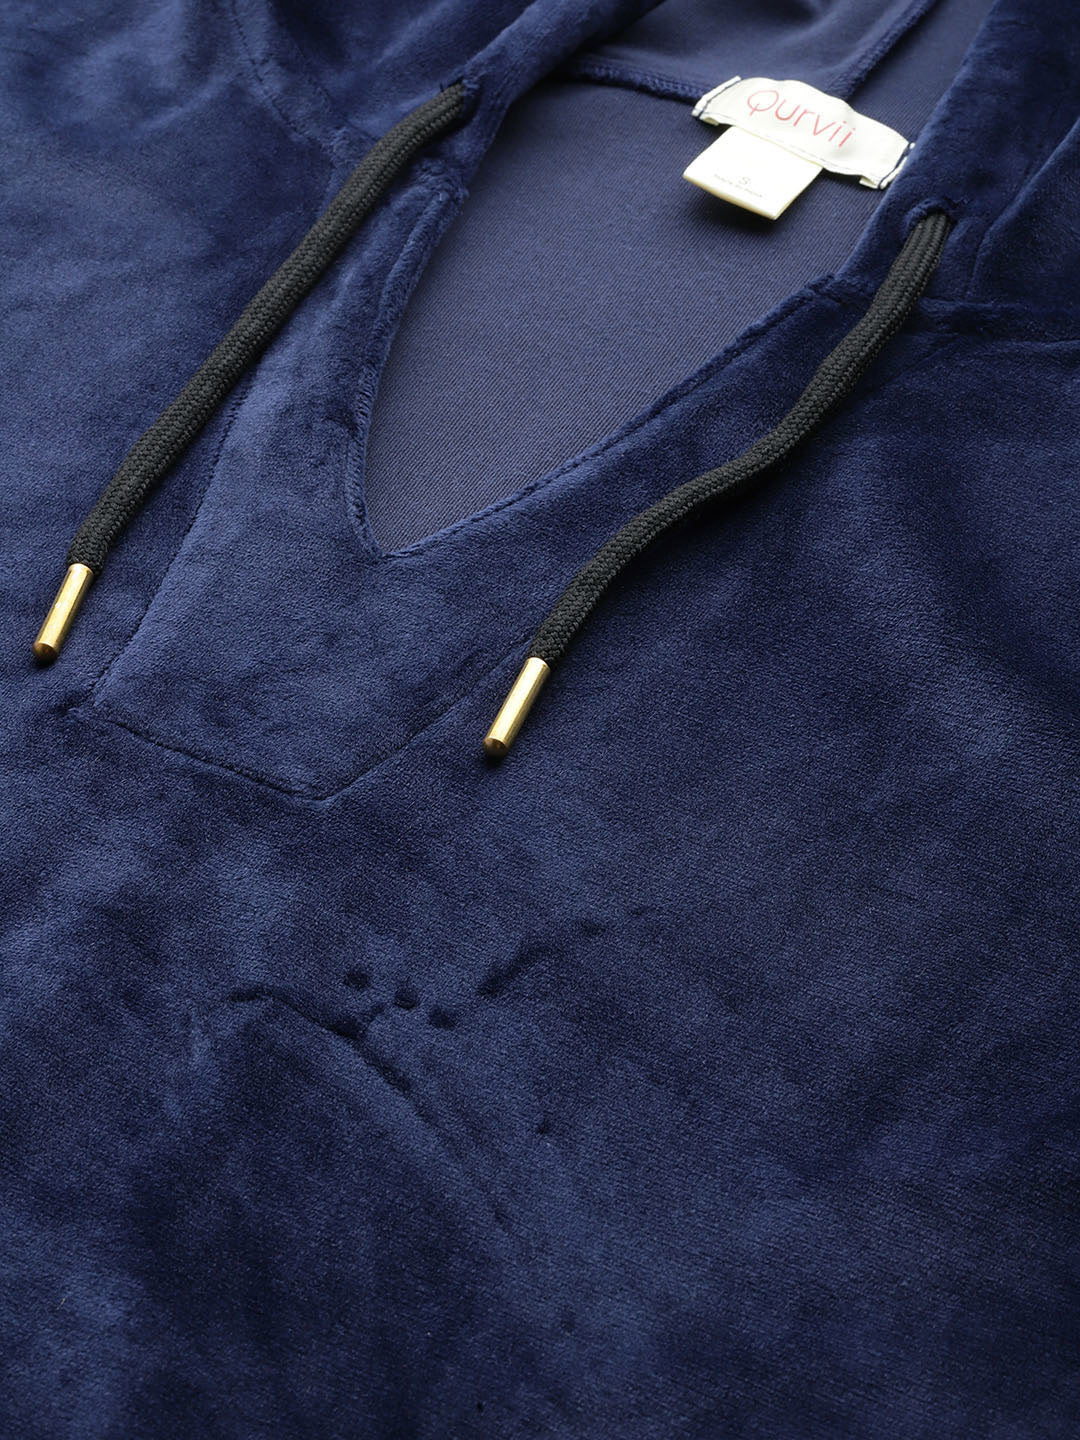 Navy solid velvet fabric with a front patch pocket. hoodie with co-ord set.